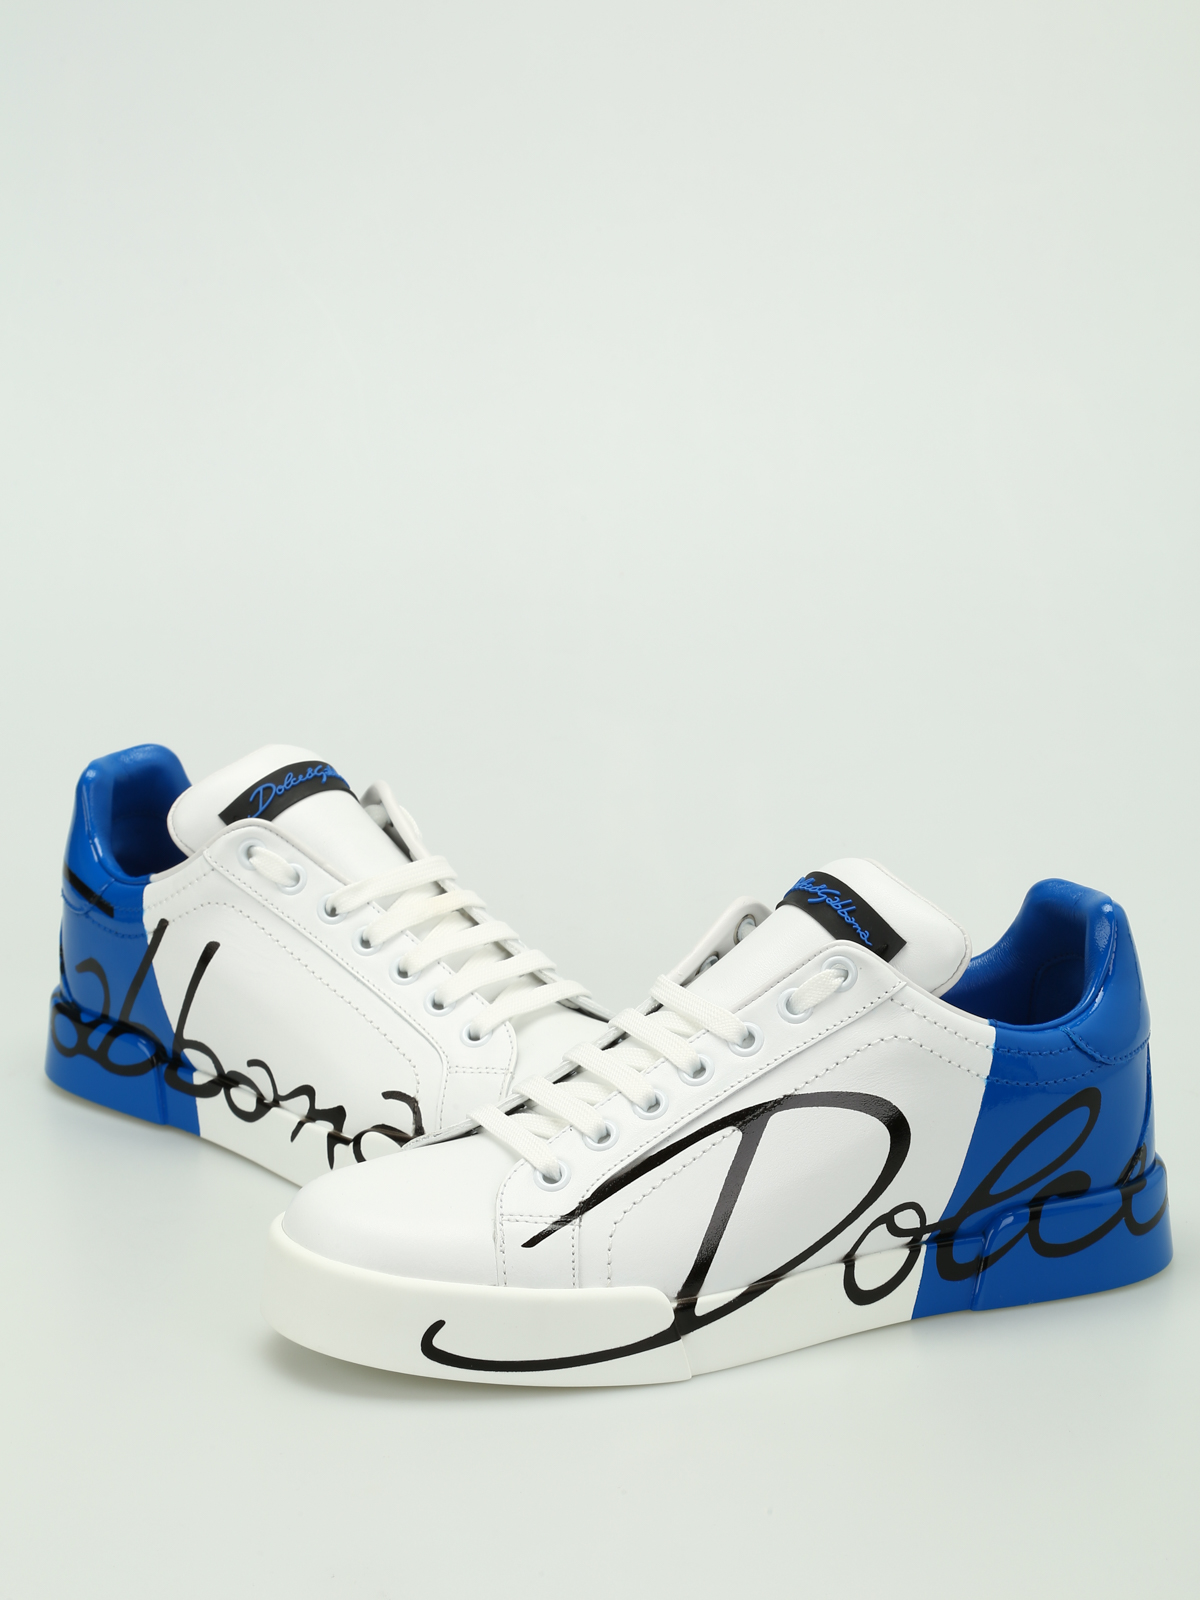 blue and white dolce and gabbana sneakers